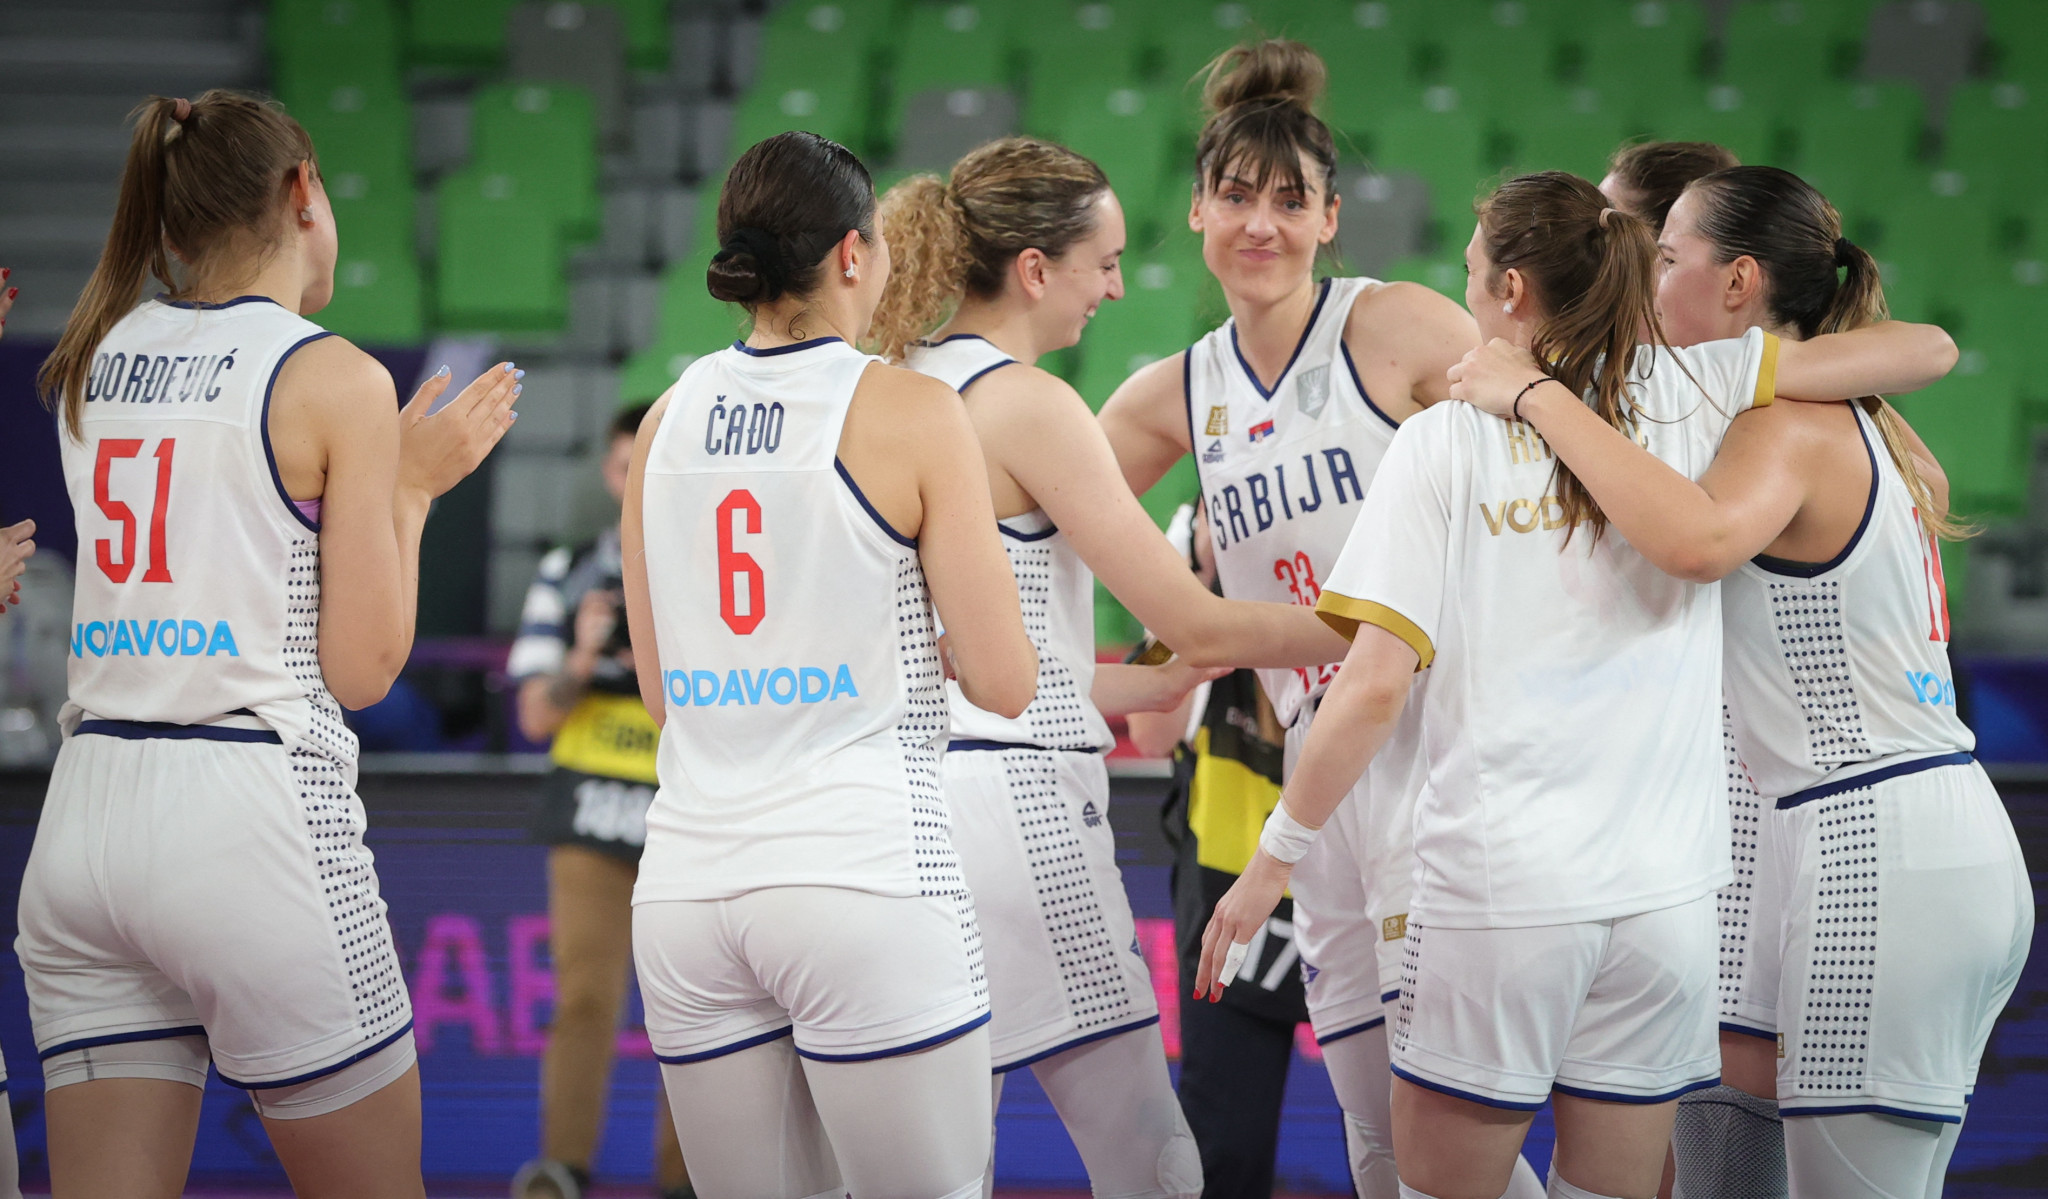 Holders Serbia reach Women’s EuroBasket quarter-finals after triumphing in qualifying match